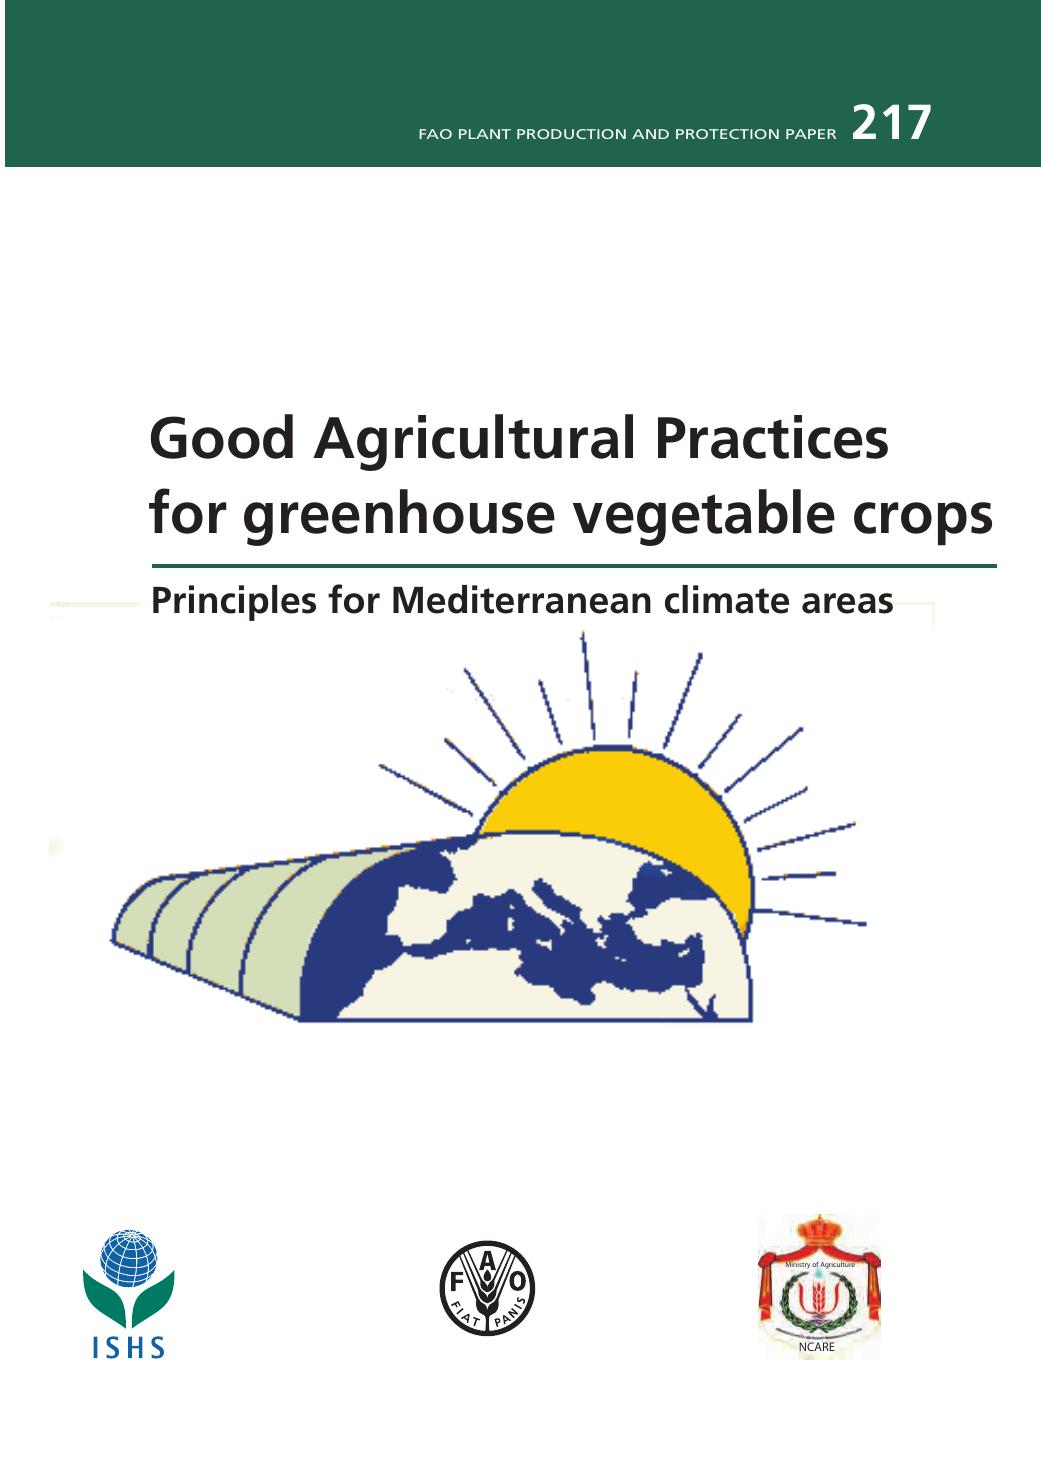 Good Agricultural Practices for greenhouse vegetable crops -Principles for Mediterranean climate areas